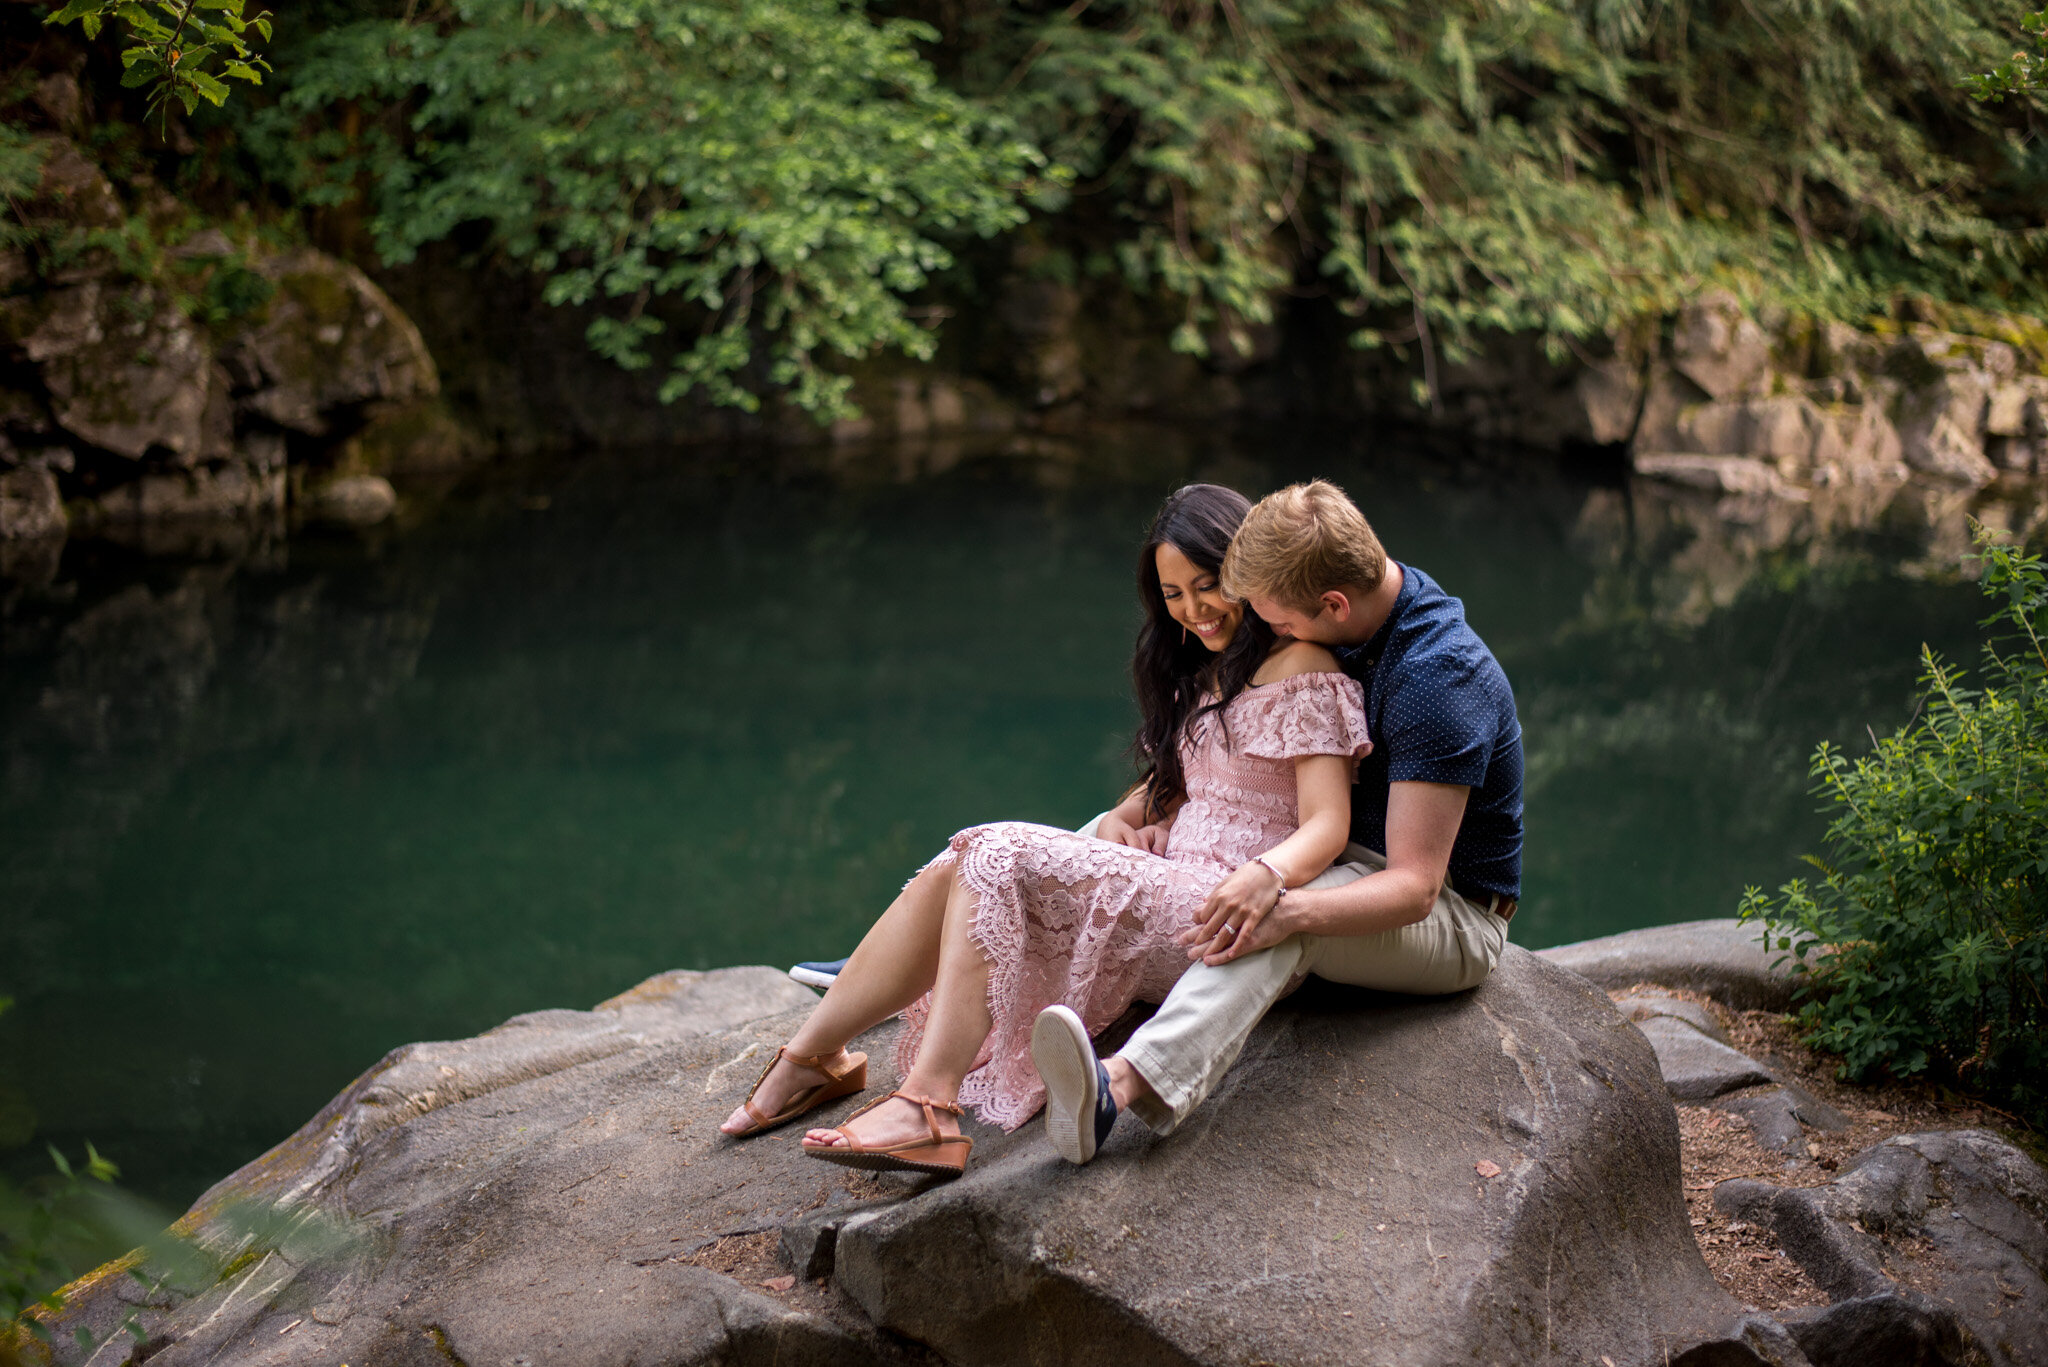 An engagement session for a couple taken at Golden Ears Provincial Park by Gold Creek in Maple Ridge, B.C.